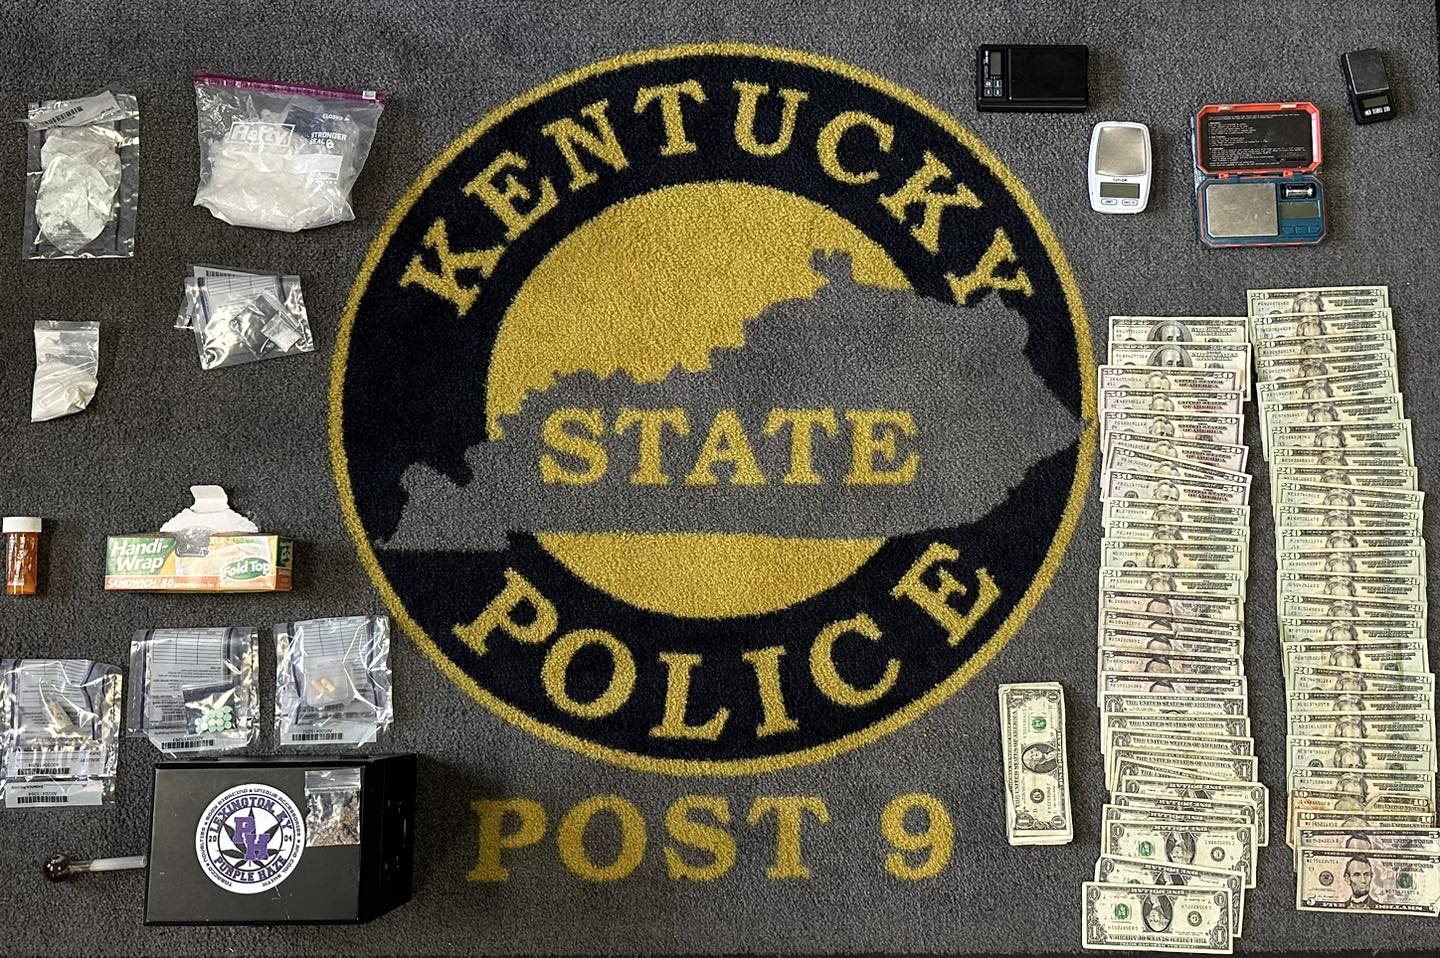 Police seize one-half pound of meth, 30 grams of fentanyl, other drugs in Floyd County